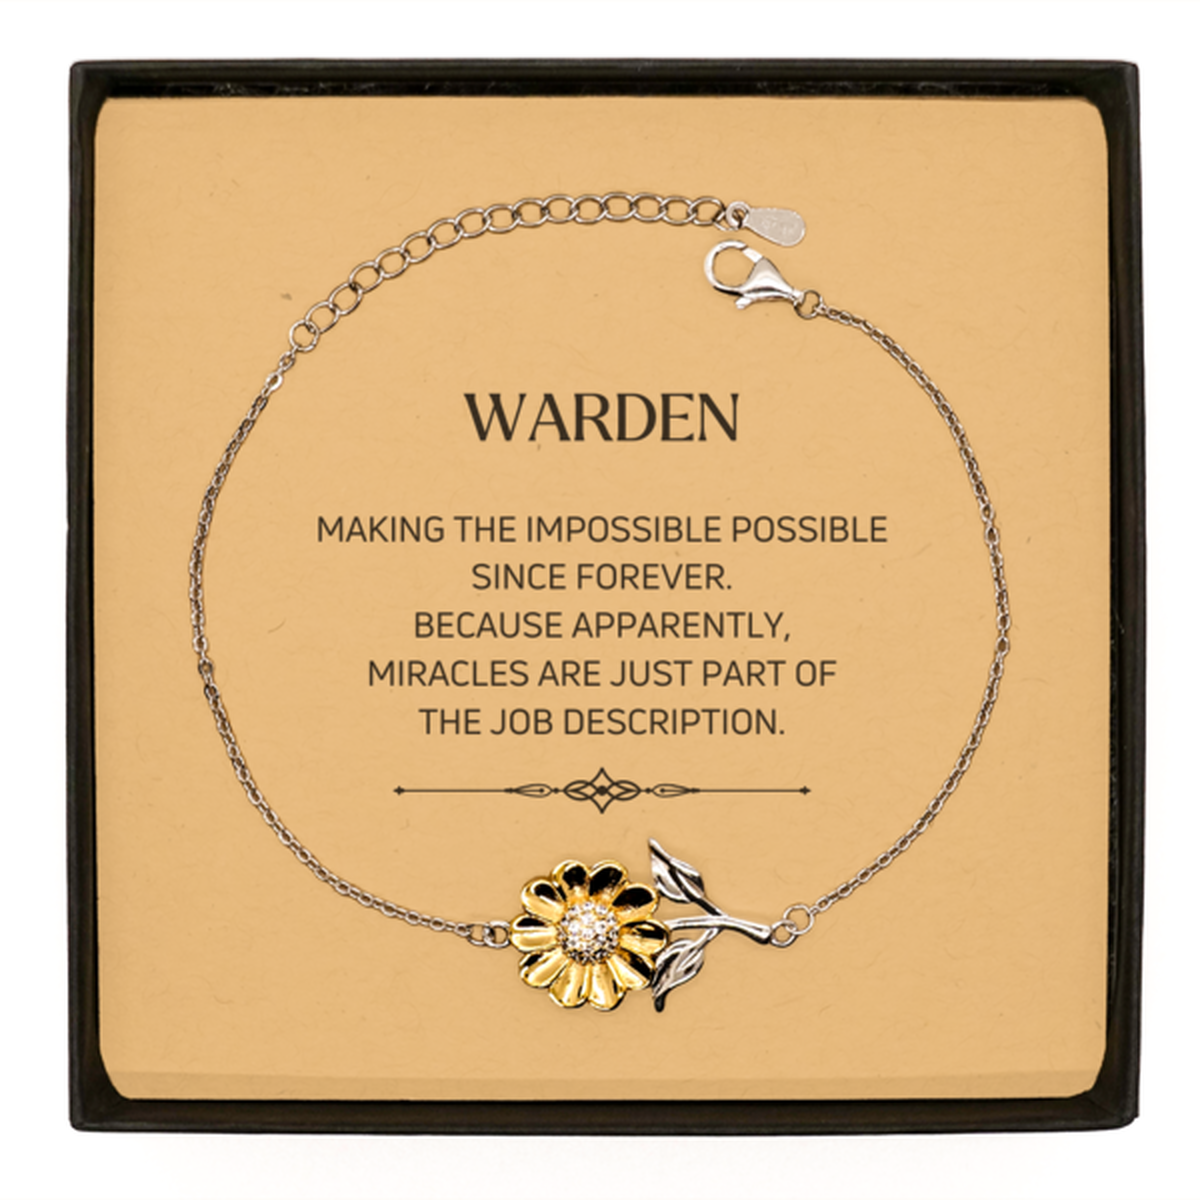 Funny Warden Gifts, Miracles are just part of the job description, Inspirational Birthday Sunflower Bracelet For Warden, Men, Women, Coworkers, Friends, Boss